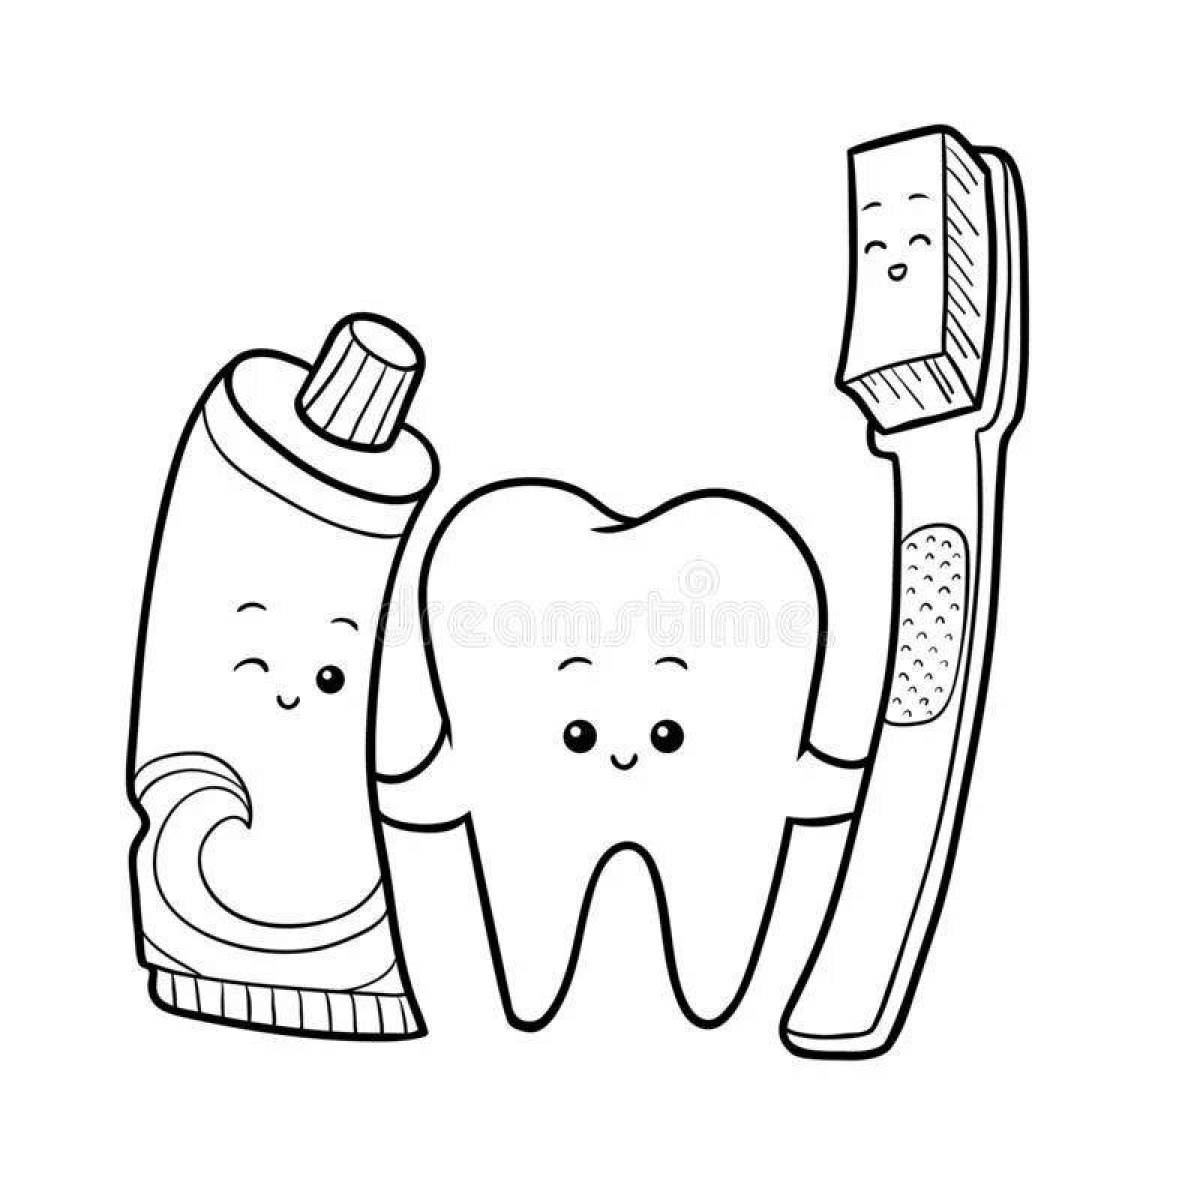 Joyful coloring page toothpaste